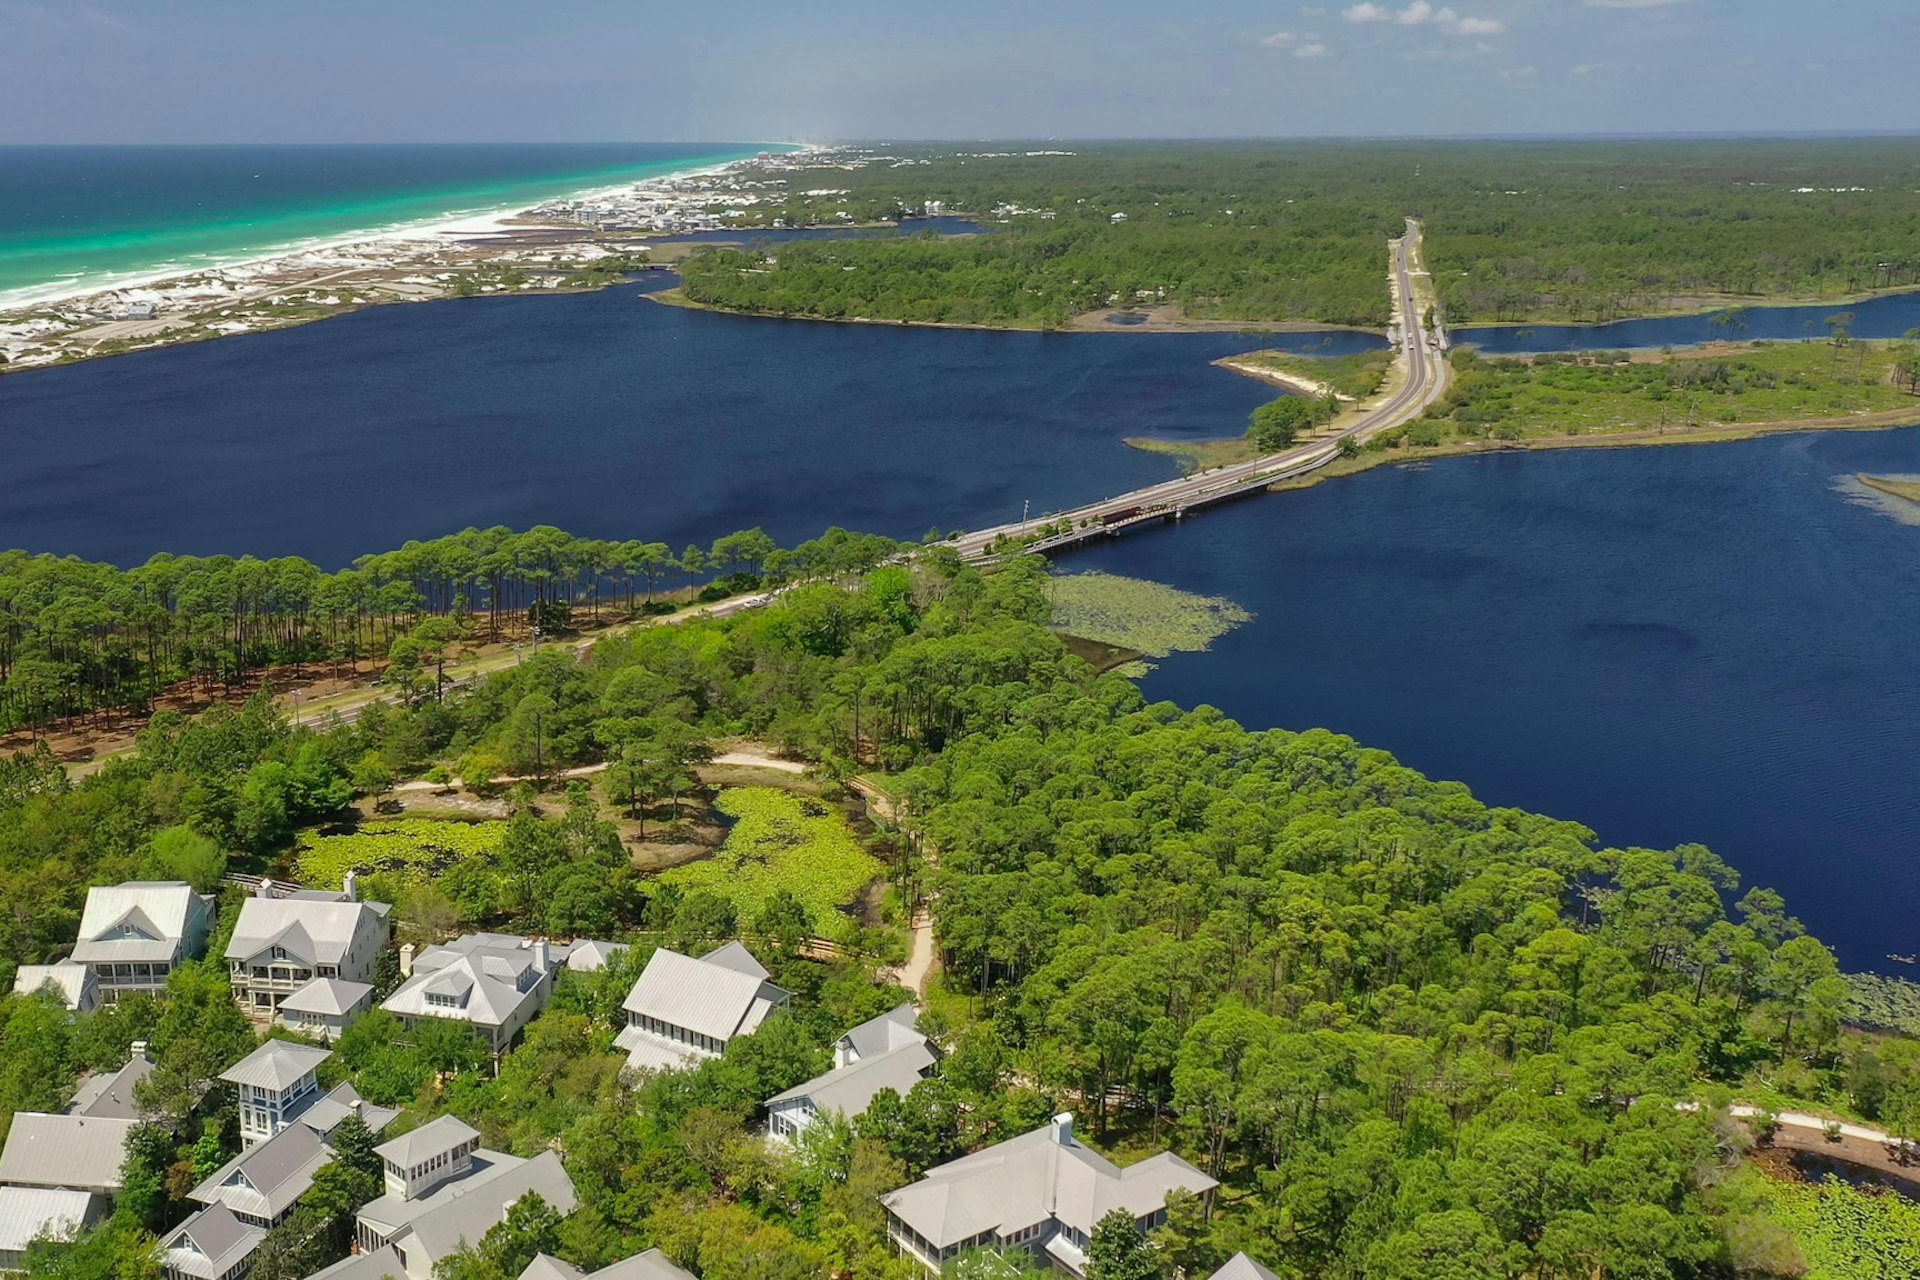 An aerial view of 30A Florida